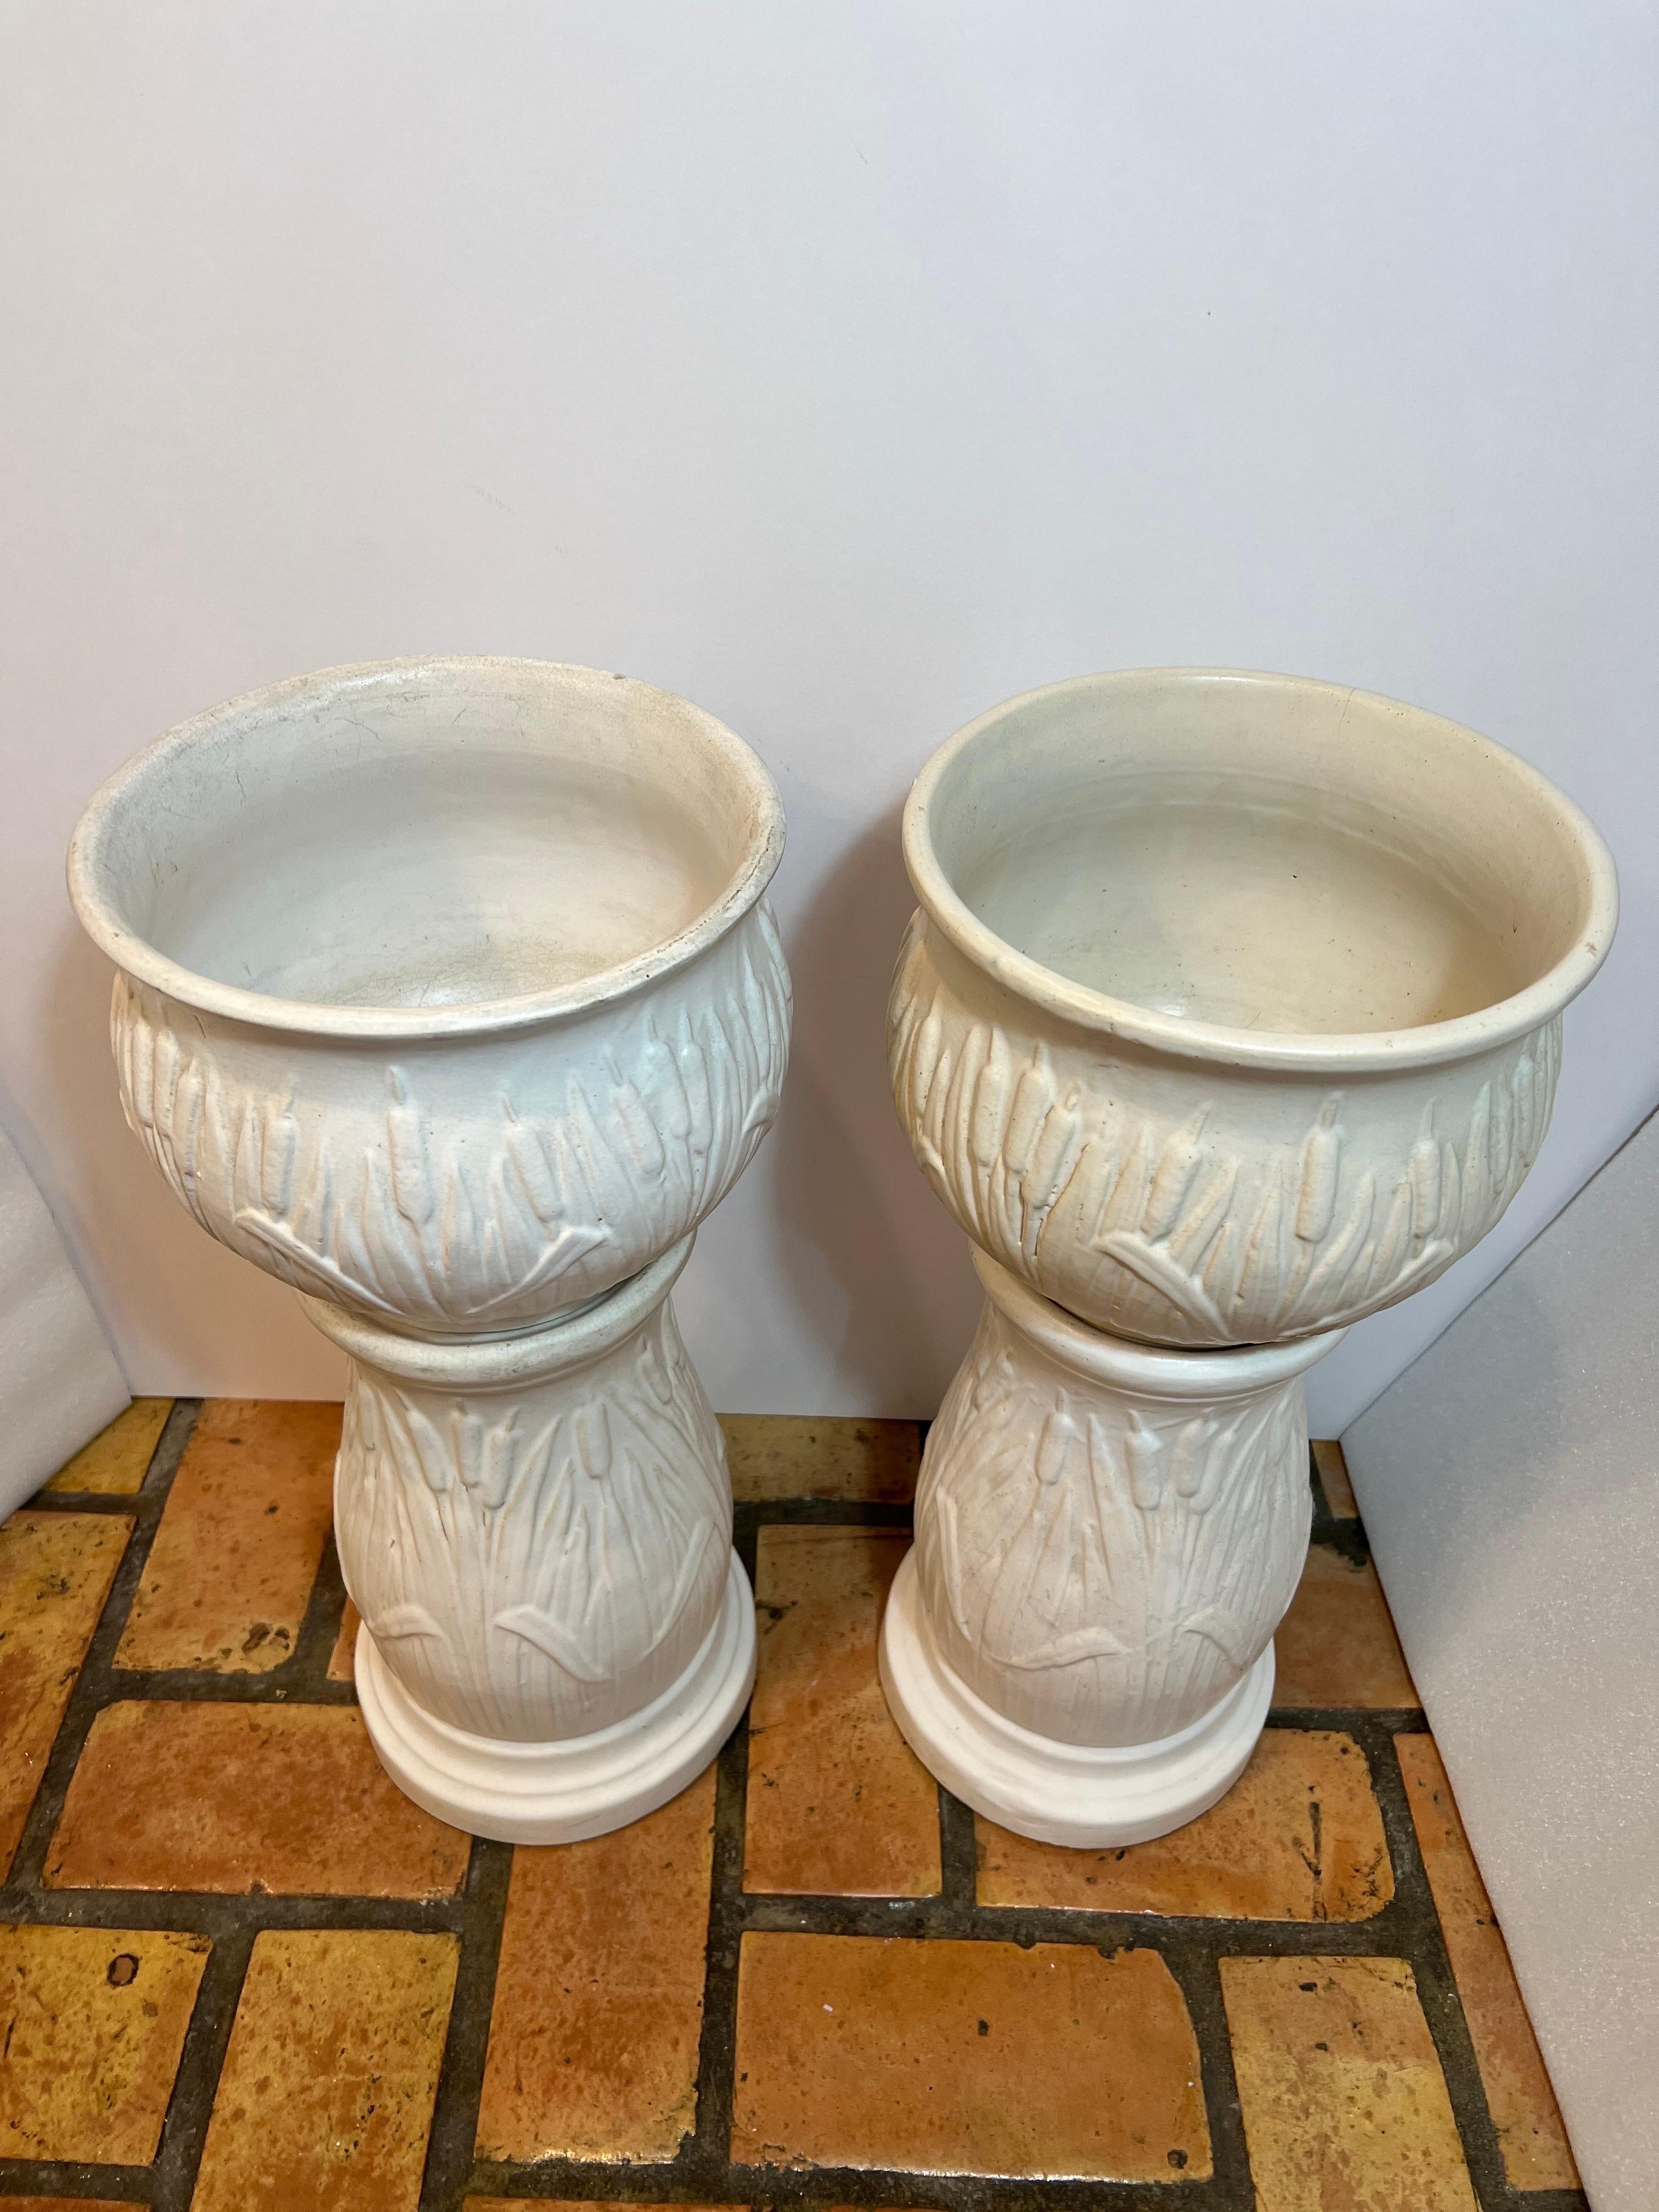 Pair of Robinson Rainsbottom Jardiniere and Pedestals with a Cattail Design 1